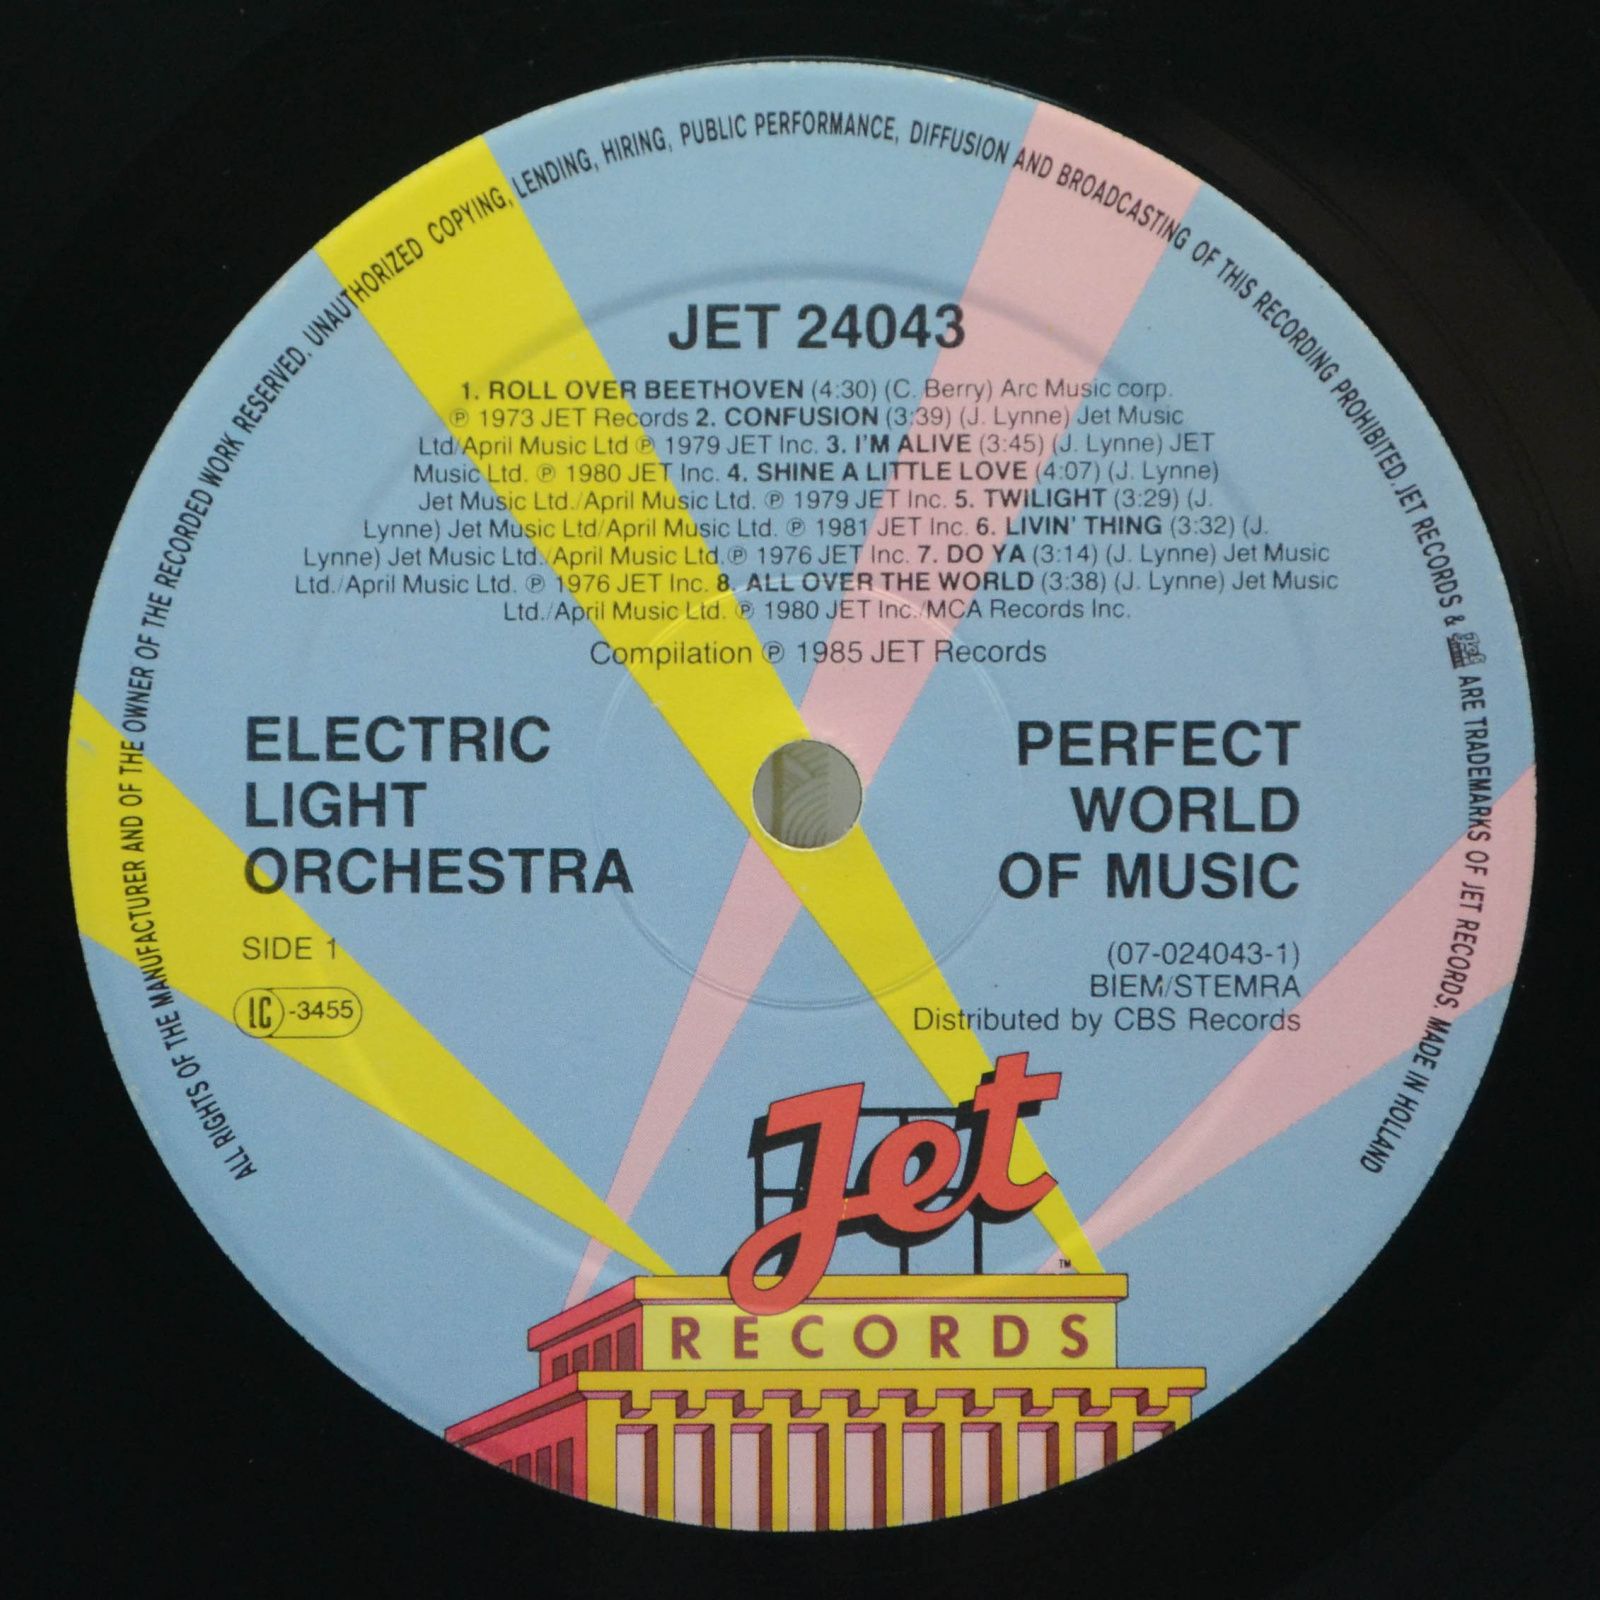 Electric Light Orchestra — A Perfect World Of Music, 1985